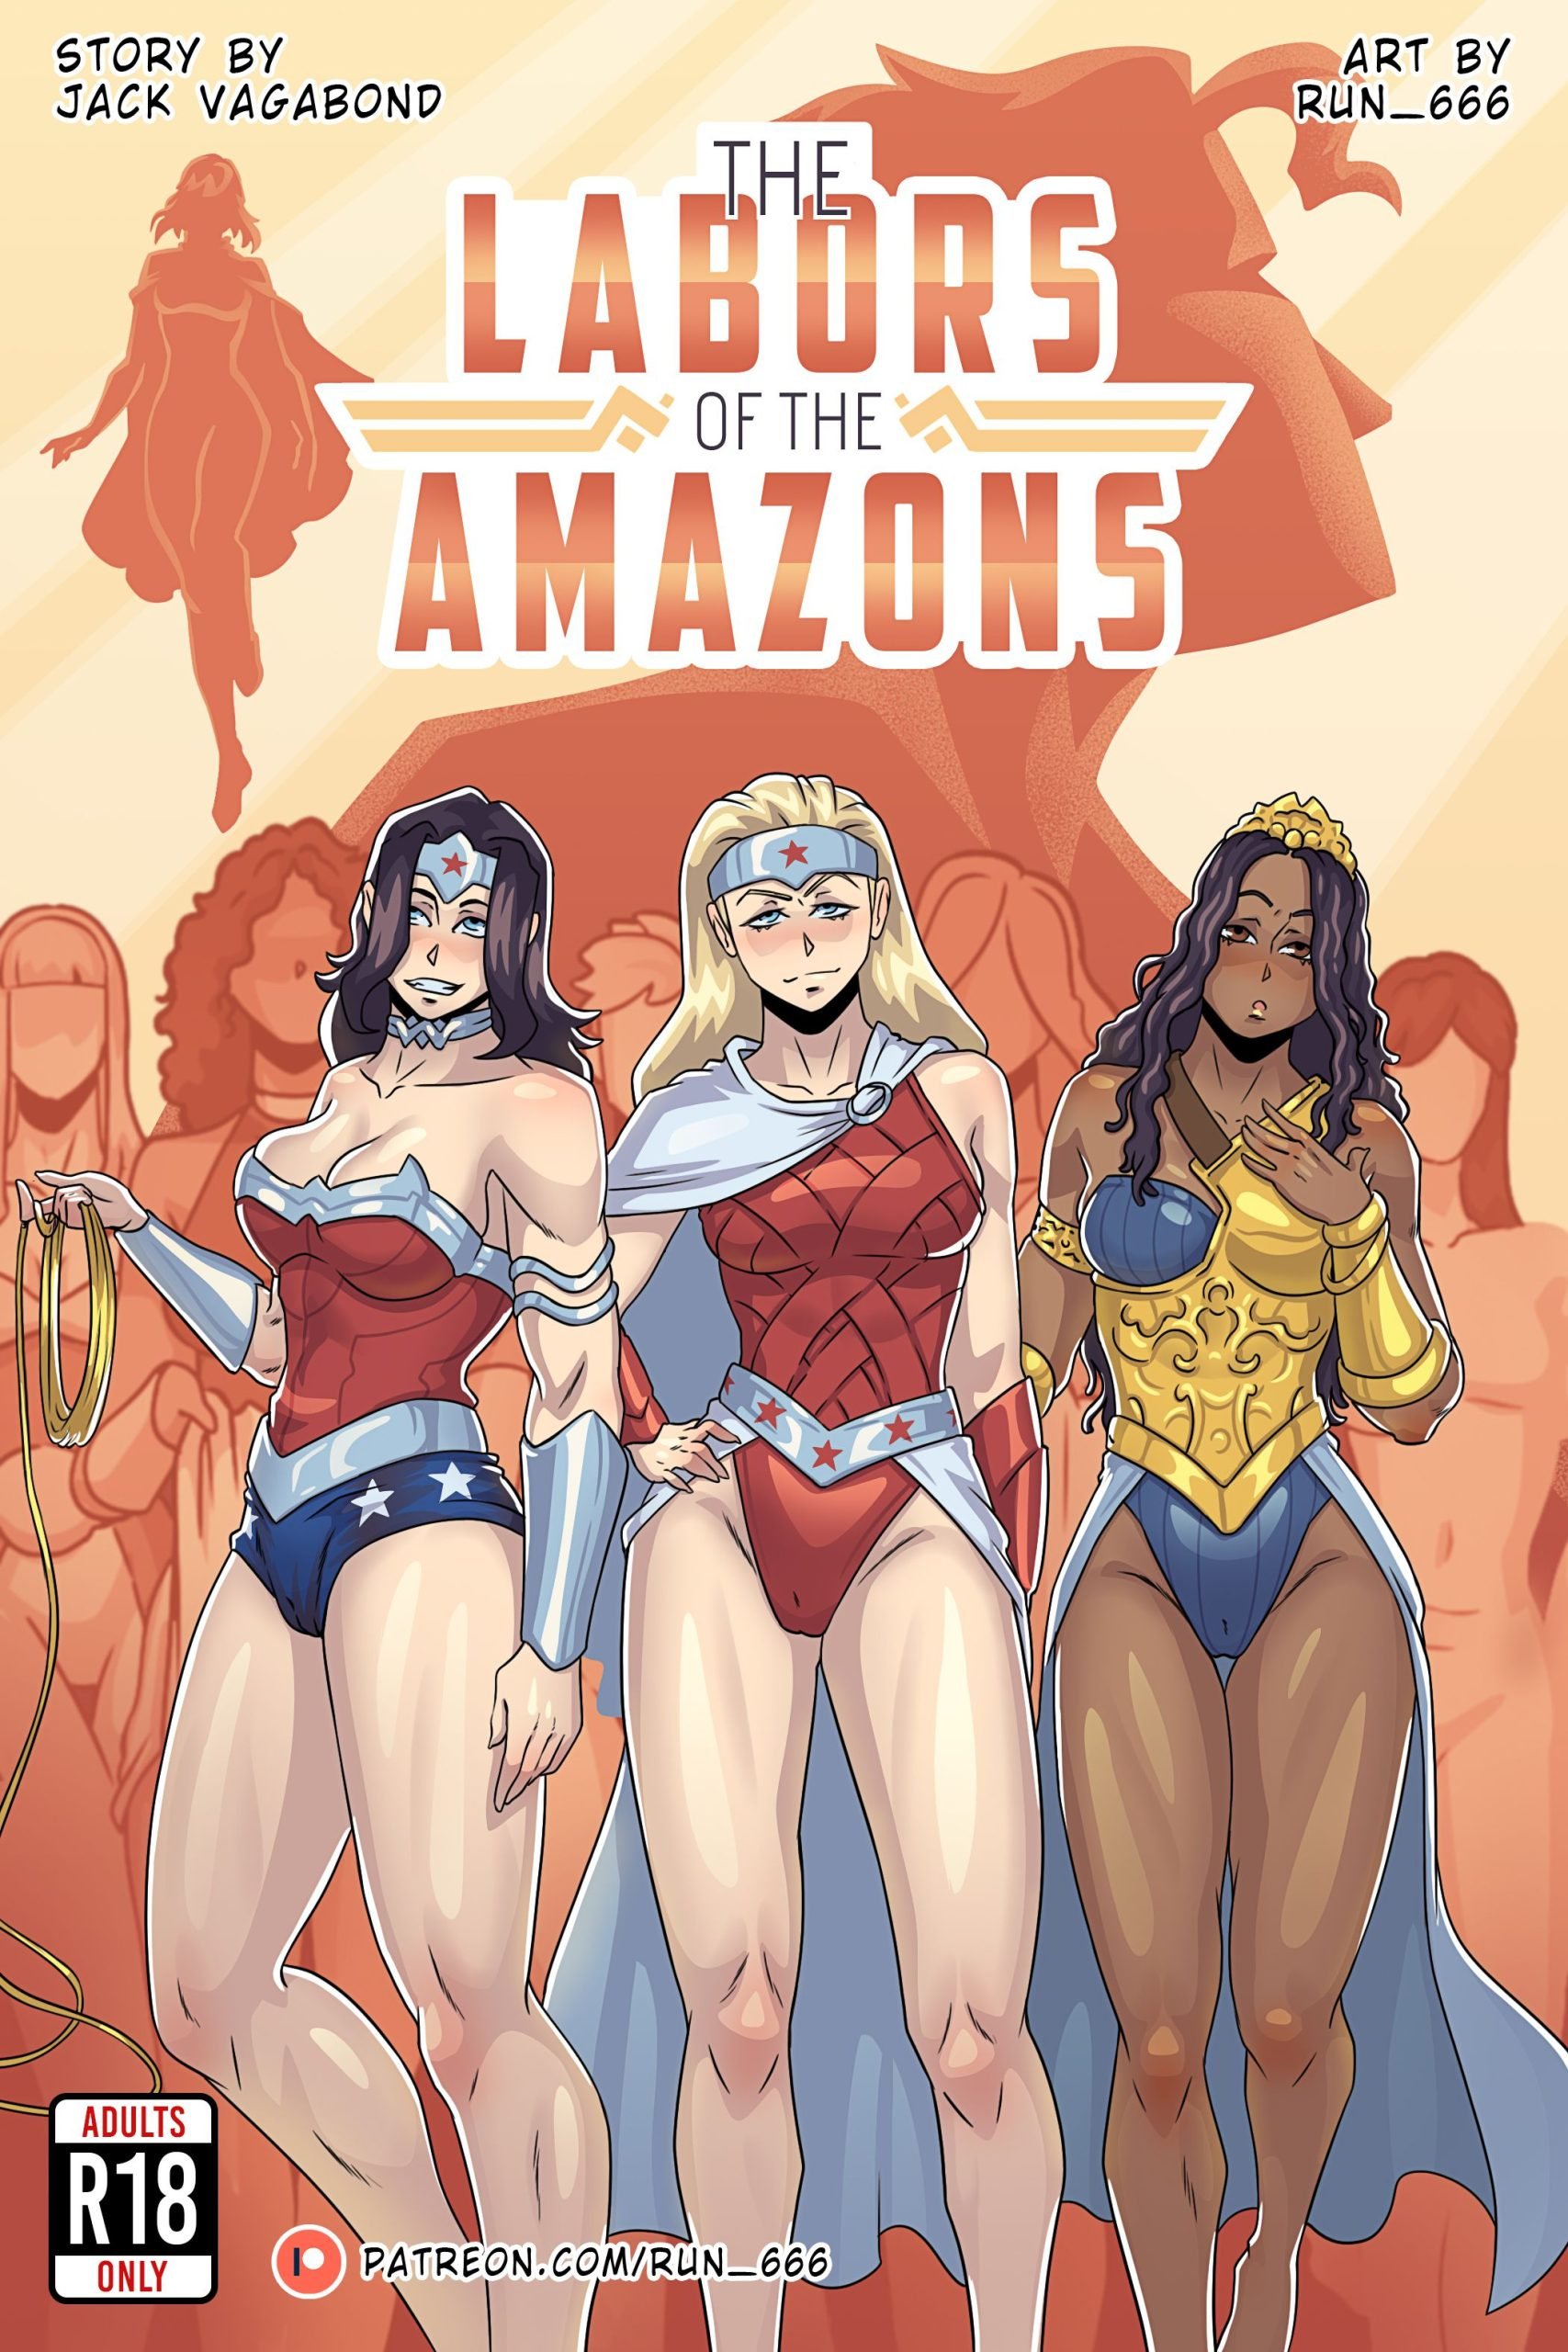 The Labors of the Amazons (Wonder Woman) Run 666 Porn Comic image